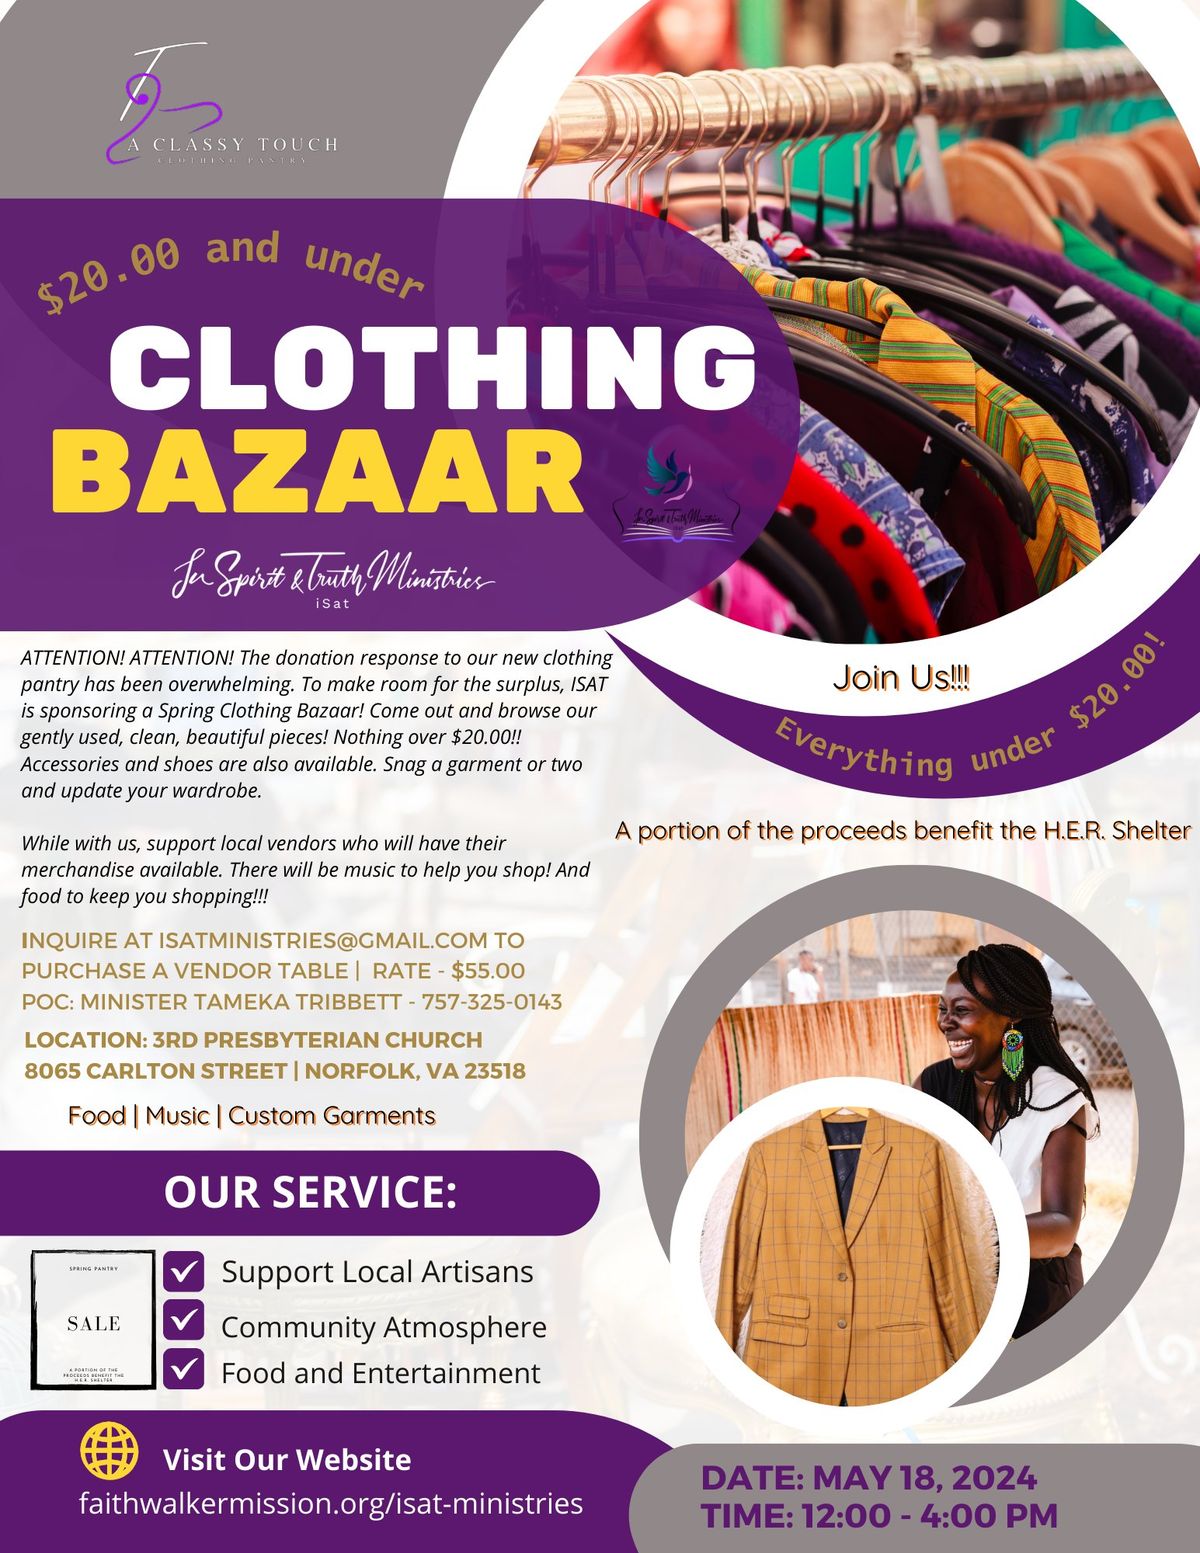 A Classy Touch Clothing Bazaar - $20 and under